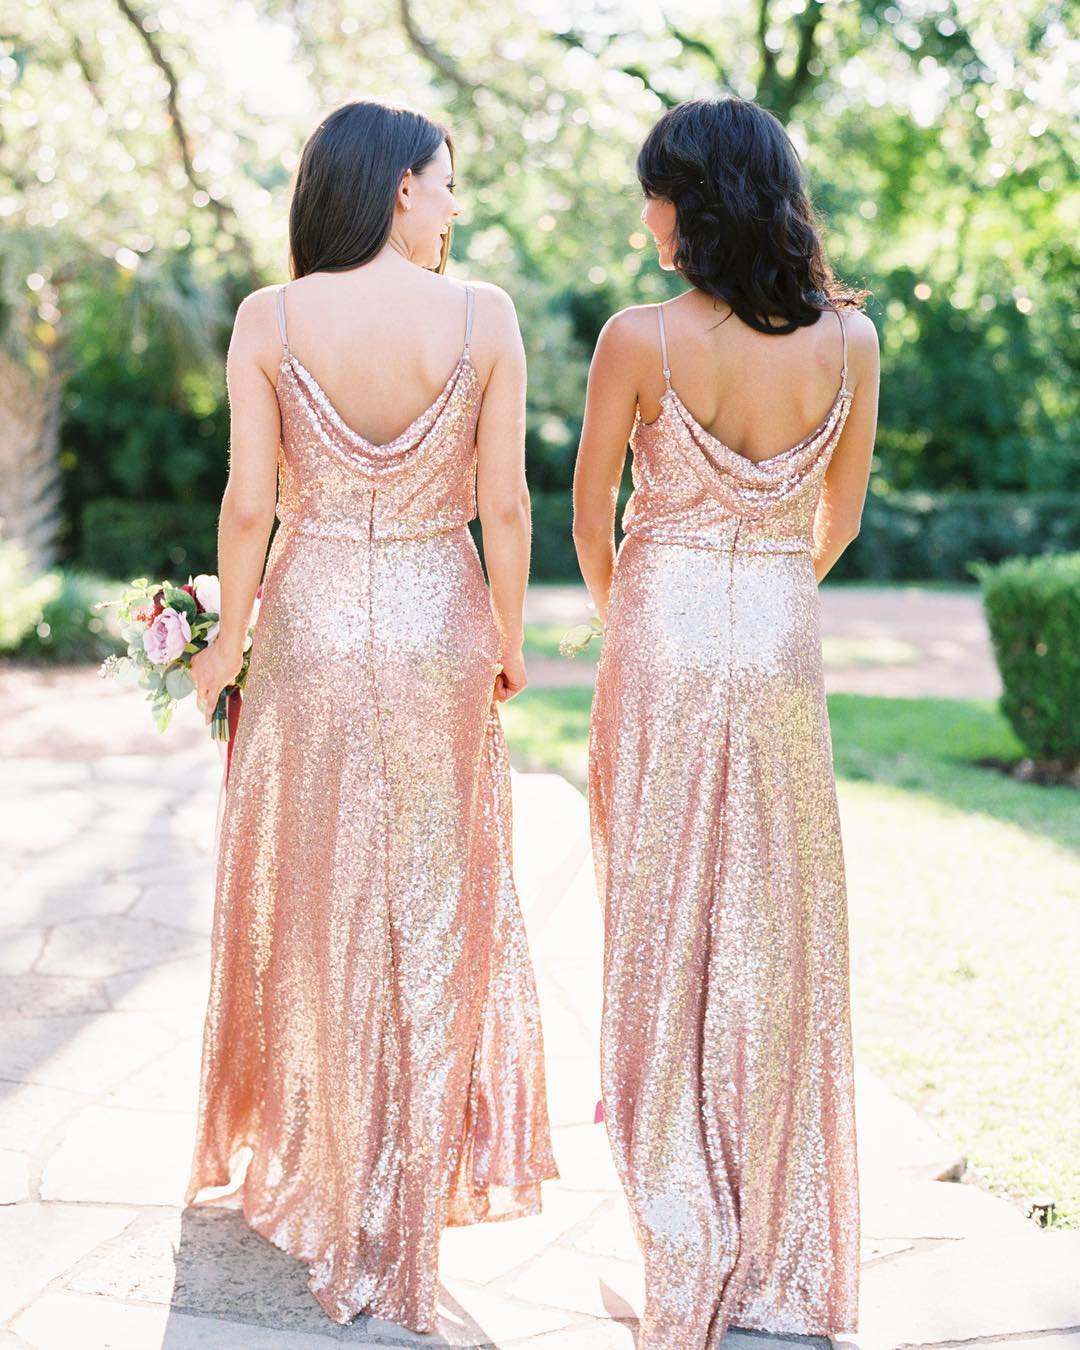 sequined metallic bridesmaid dresses with spaghetti straps low back rose gold shoprevelry